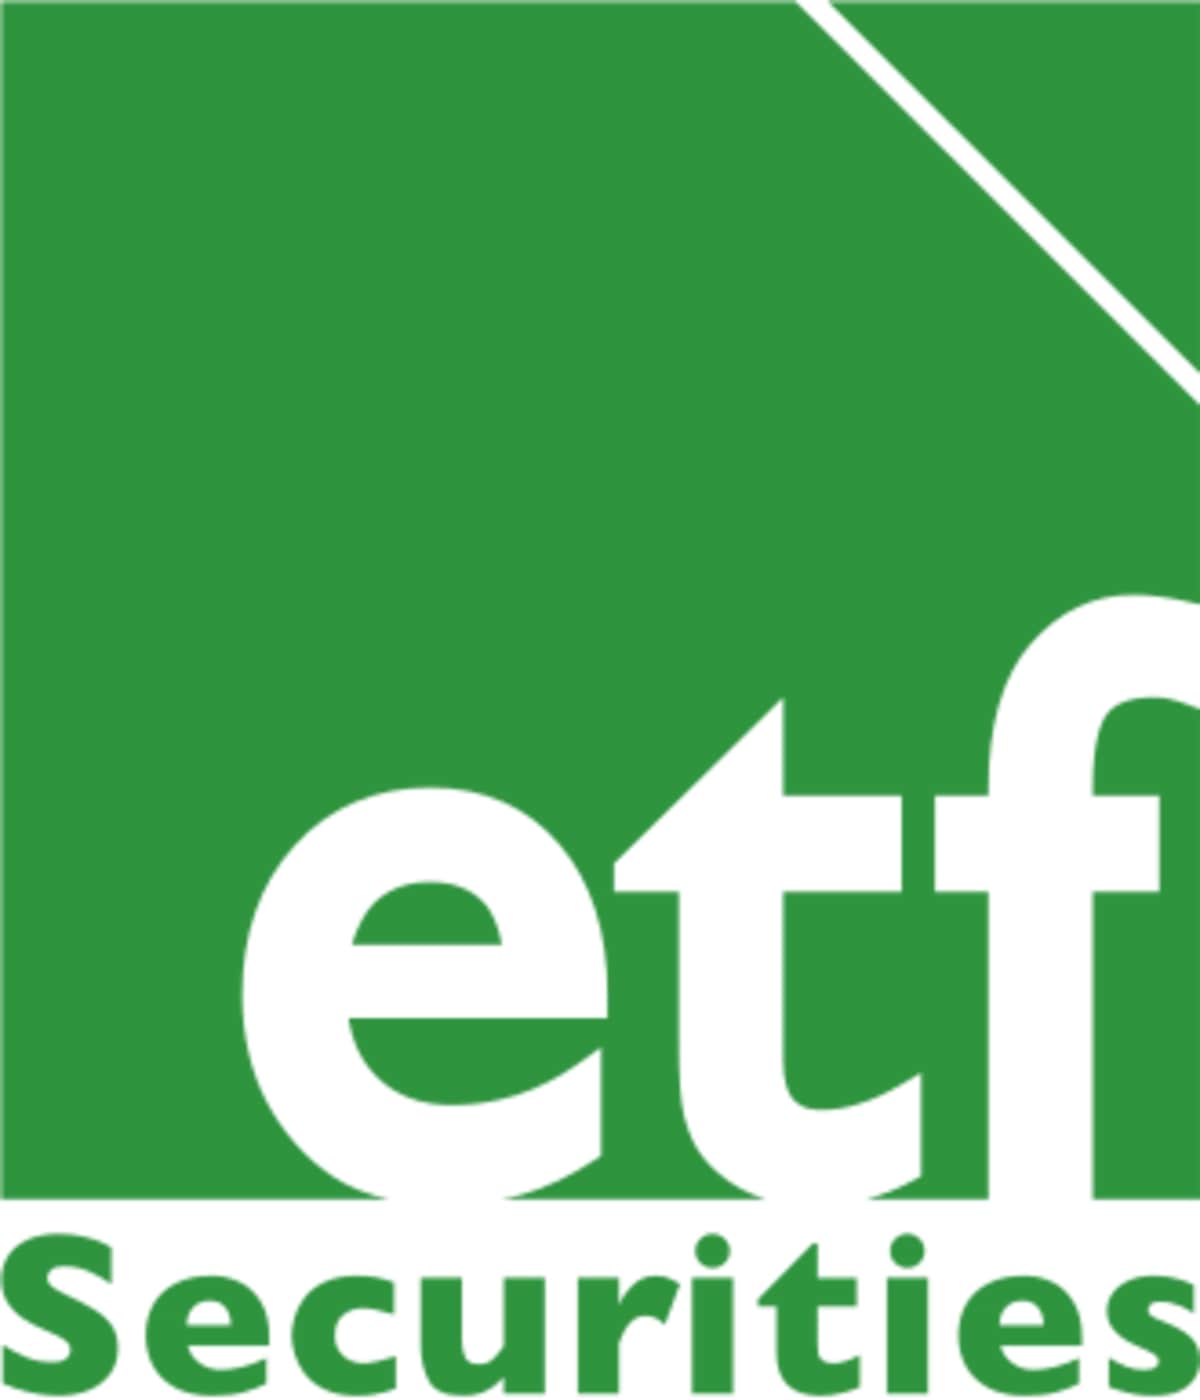 ETF Securities Weekly Flows Analysis - Inflows into ETPs driven by tactical reallocations